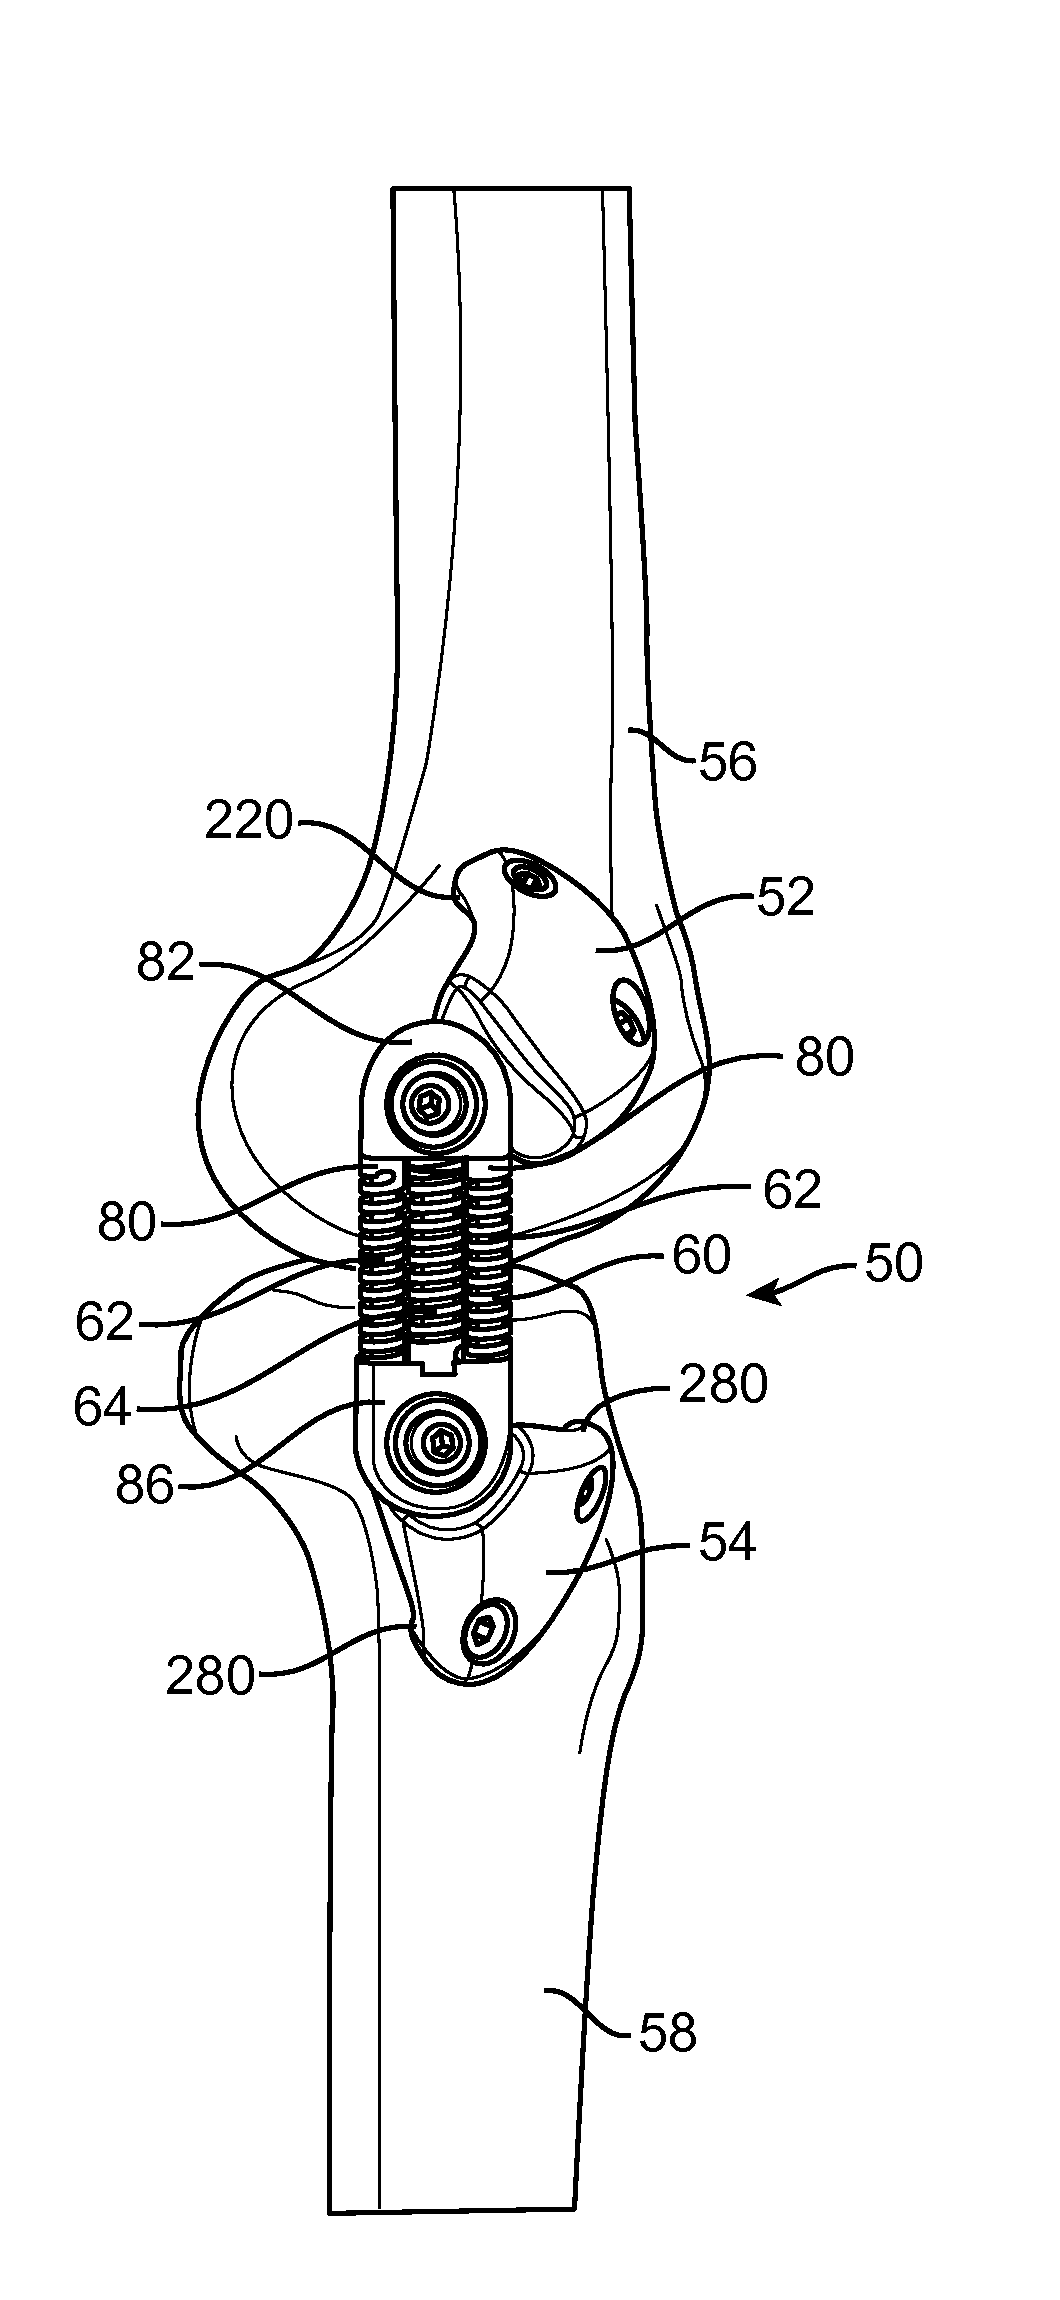 Implantation Approach and Instrumentality for an Energy Absorbing System